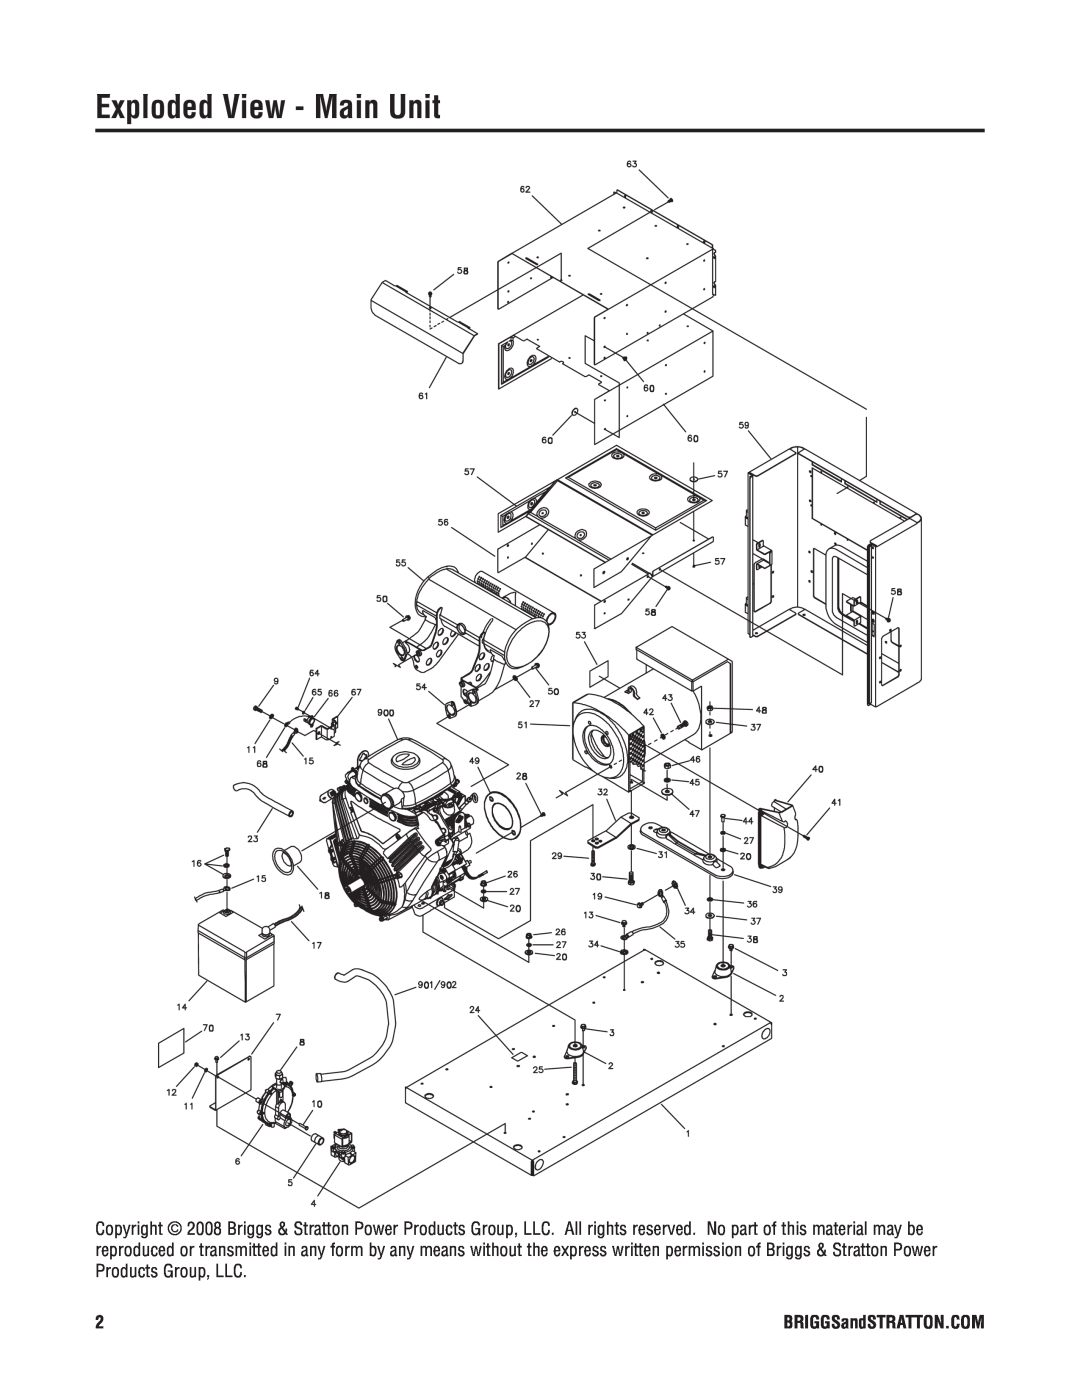 Briggs & Stratton 040234-1 manual Exploded View - Main Unit 